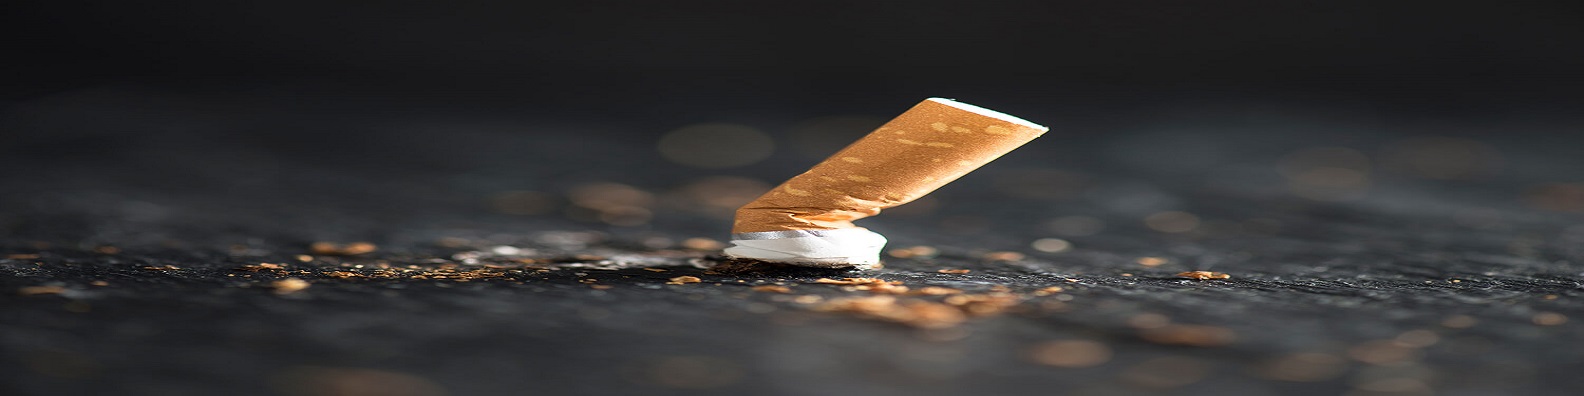 Philip Morris is fighting for a smoke-free Denmark